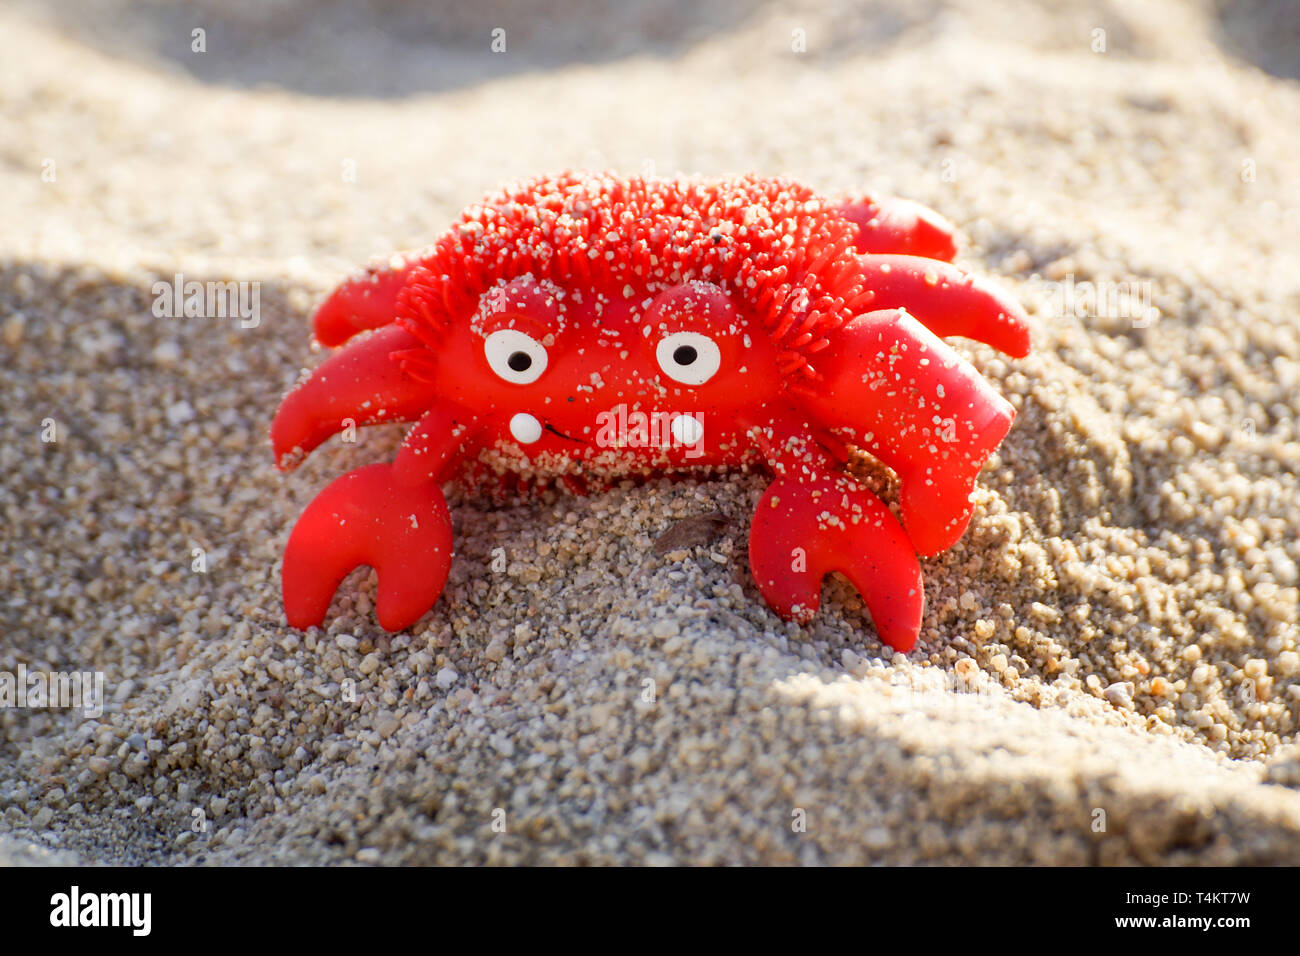 Colourful red crab toy on a beach Stock Photo